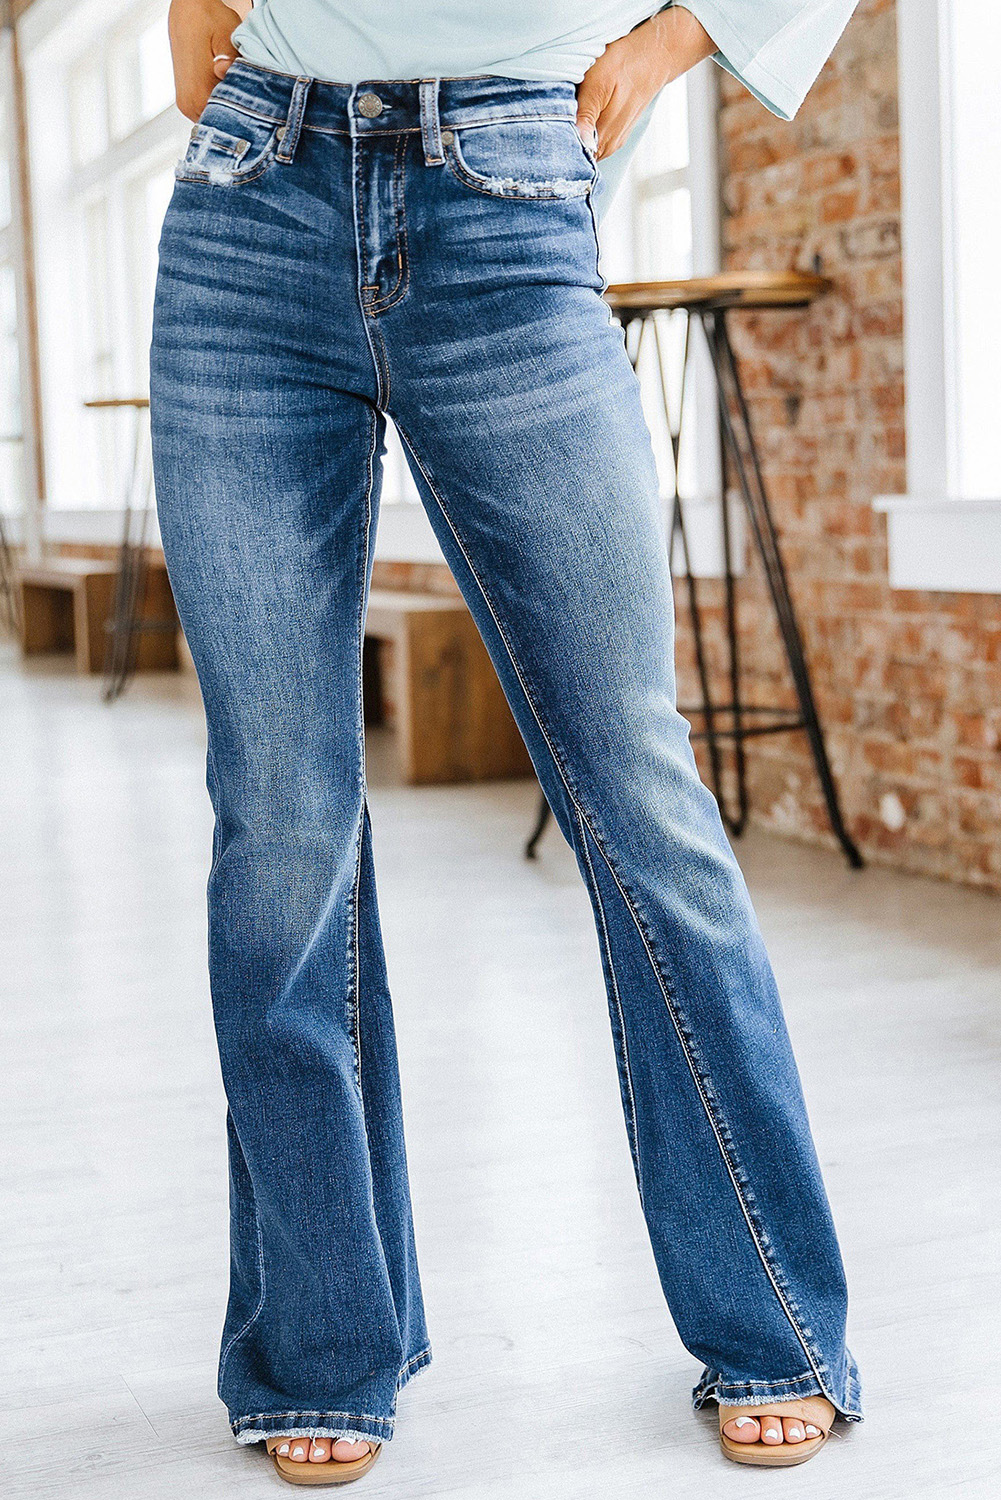 Learning How to Find Good Jeans for Women 